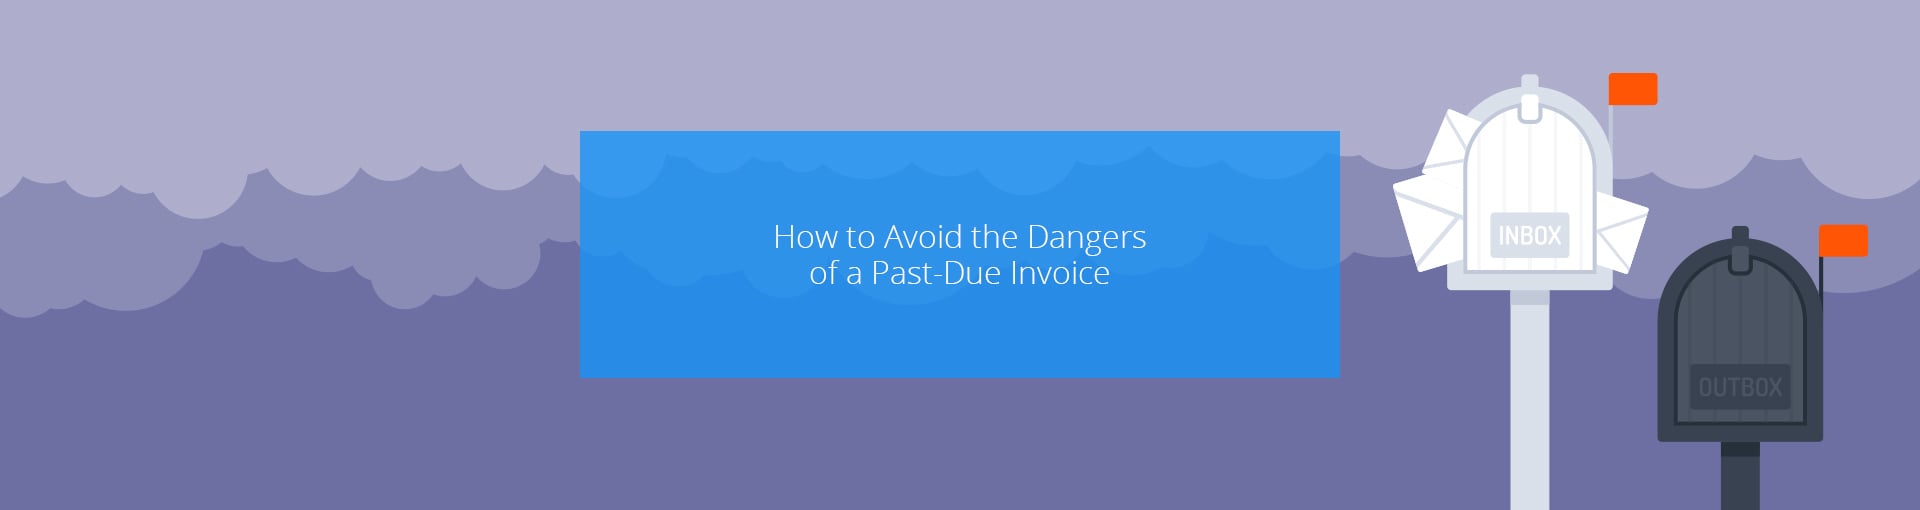 How to Avoid the Dangers of a Past Due Invoice Featured Image